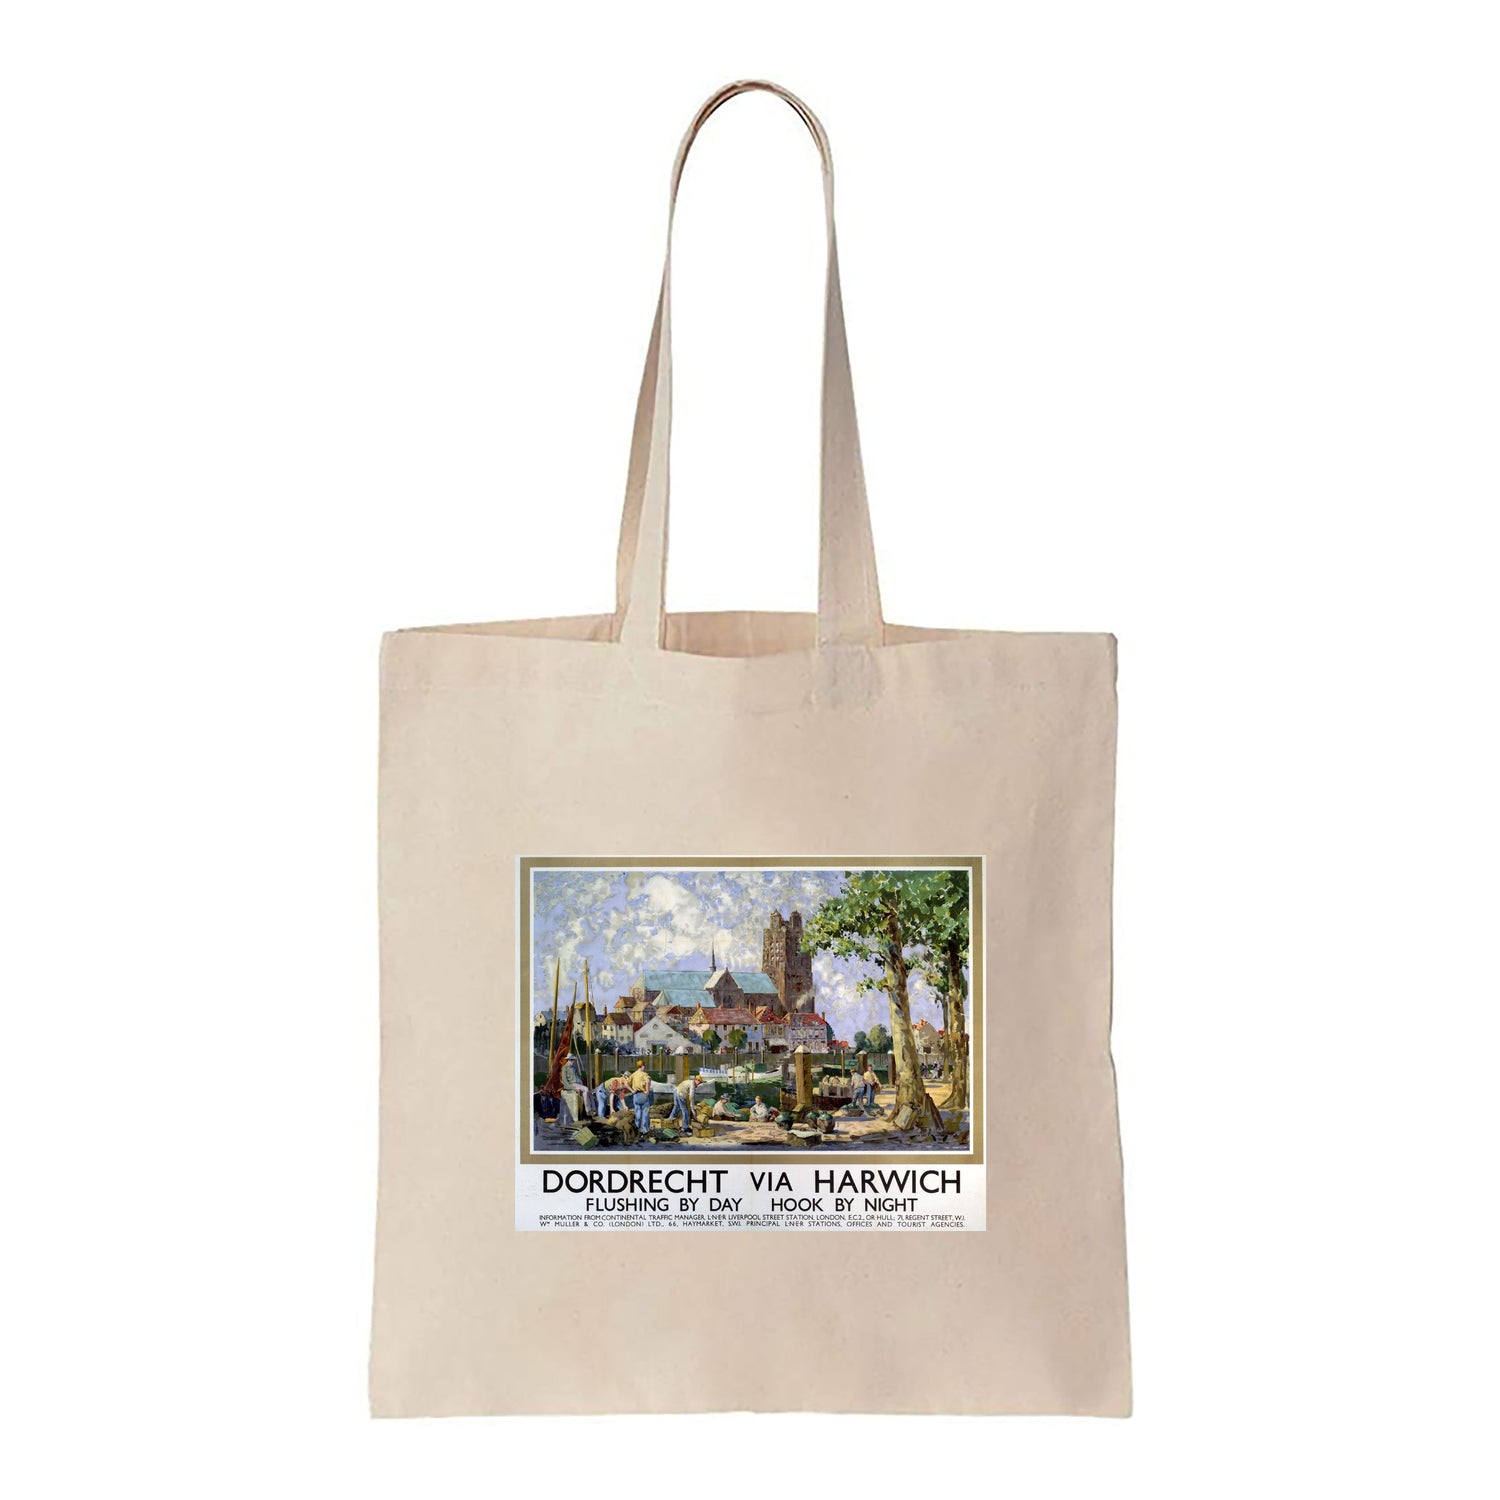 Dordrecht via Harwich - Flushing by Day, Hook by Night - Canvas Tote Bag